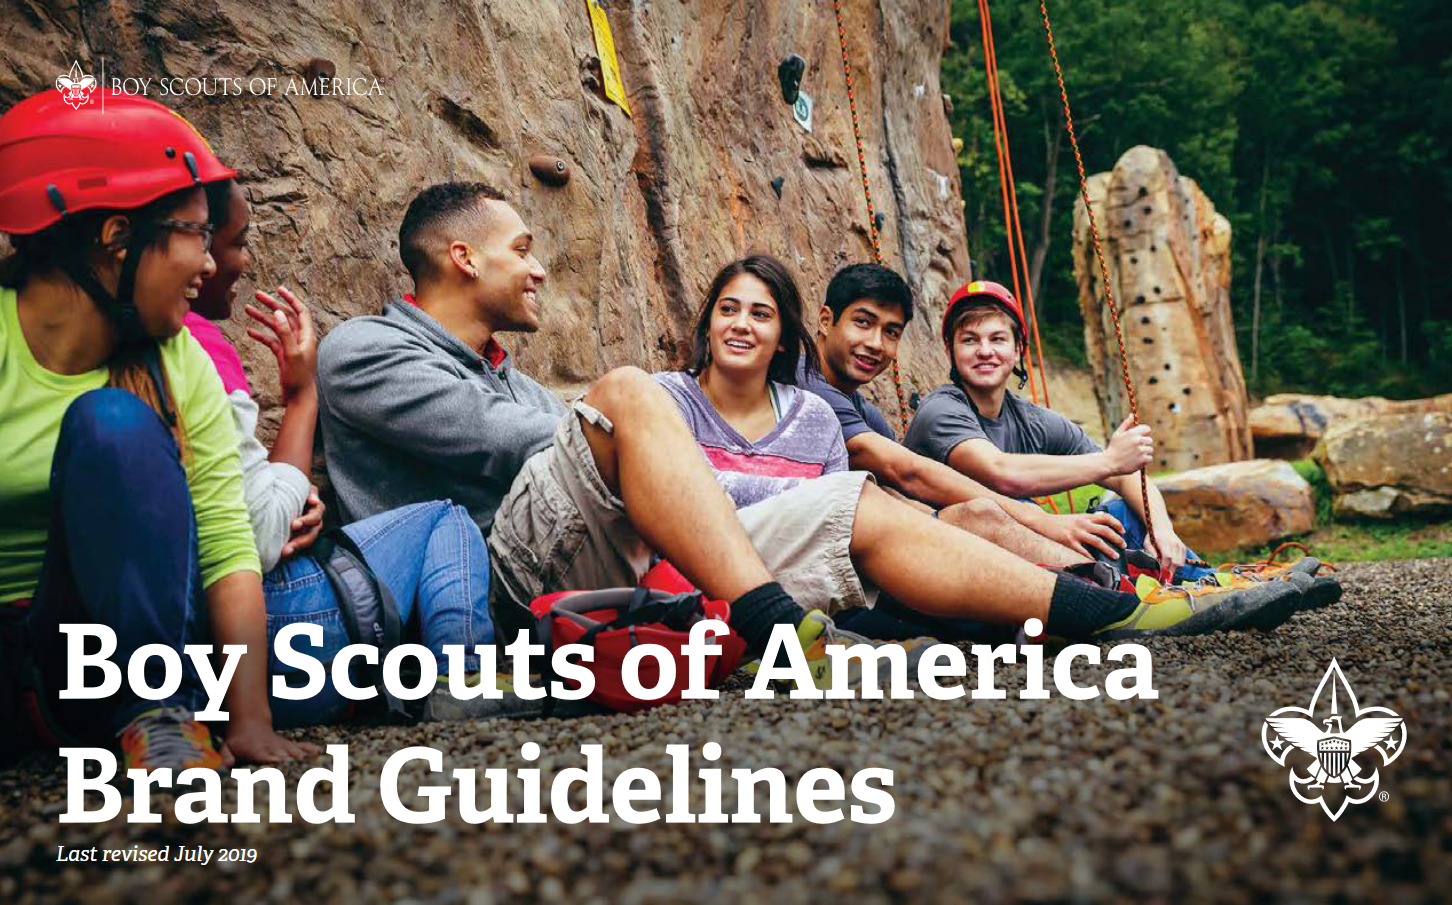 Boy Scouts of America's Brand Guide